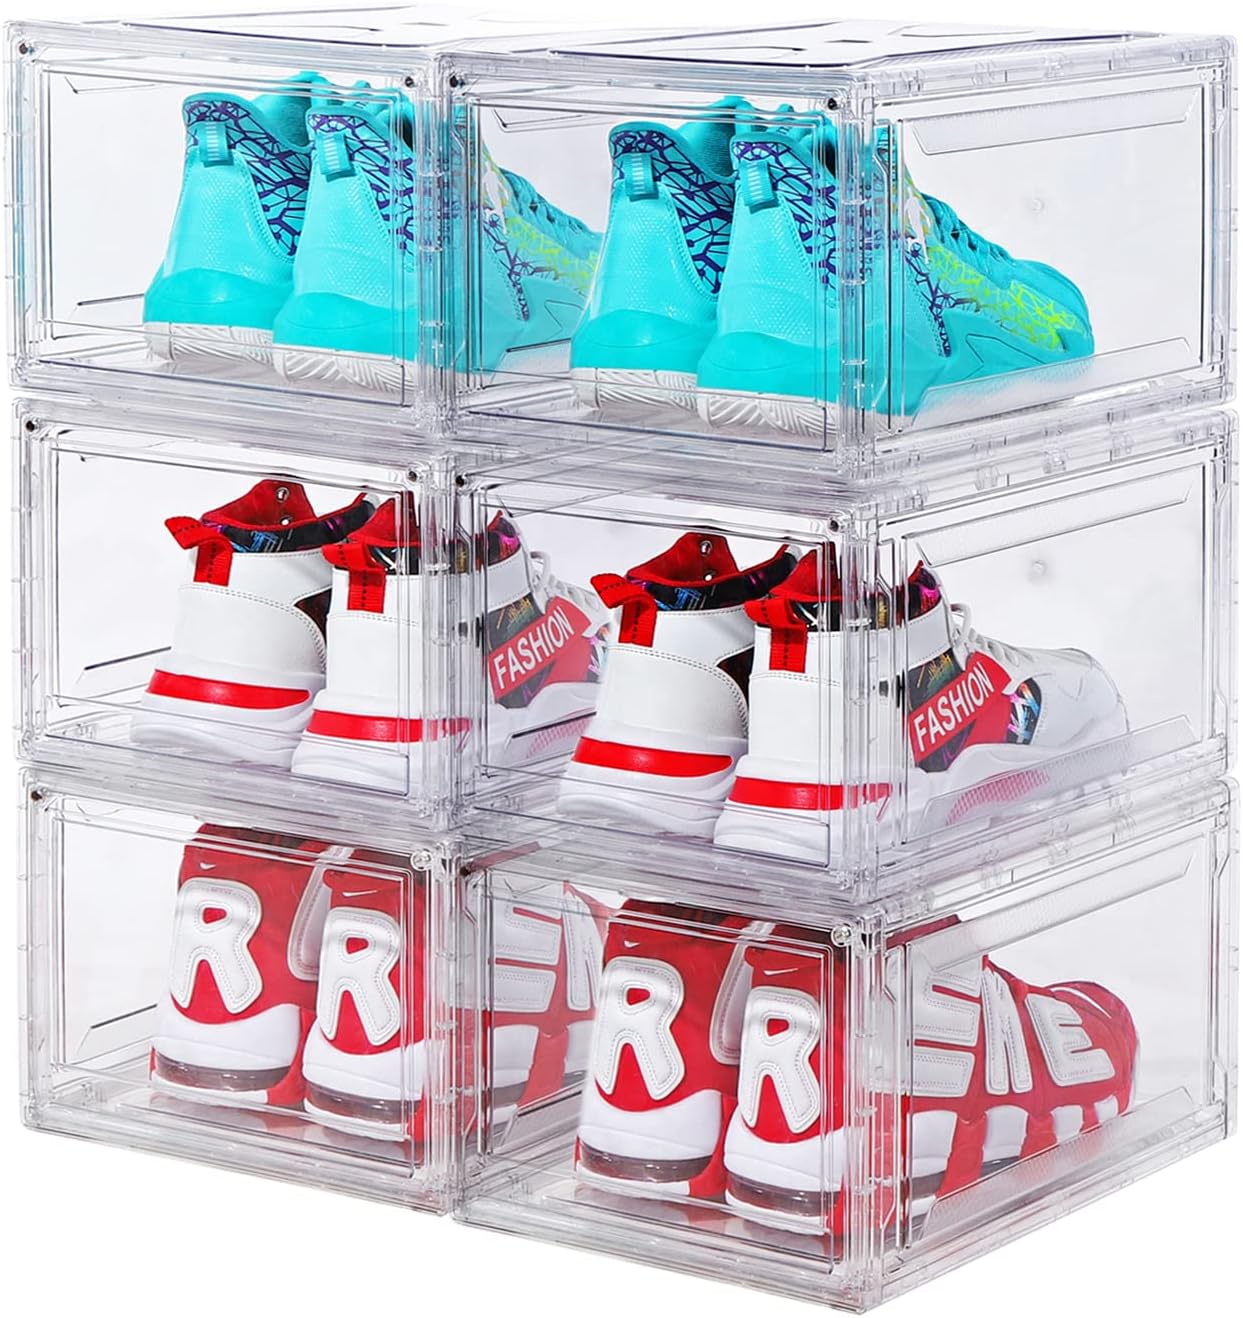 I was very pleased with this product. I am an avid shoe collector and these protect from all dust, debris and otherwise elements that can comprise the integrity of your kicks. These stack well and I opted for the clear version so you can see the shoes and gives them the display look in your place of storage. The cases themselves were very easy to assemble. I also cracked and bent a few tabs when I was putting this together but the design is SO resilient that each piece snapped together tightly a